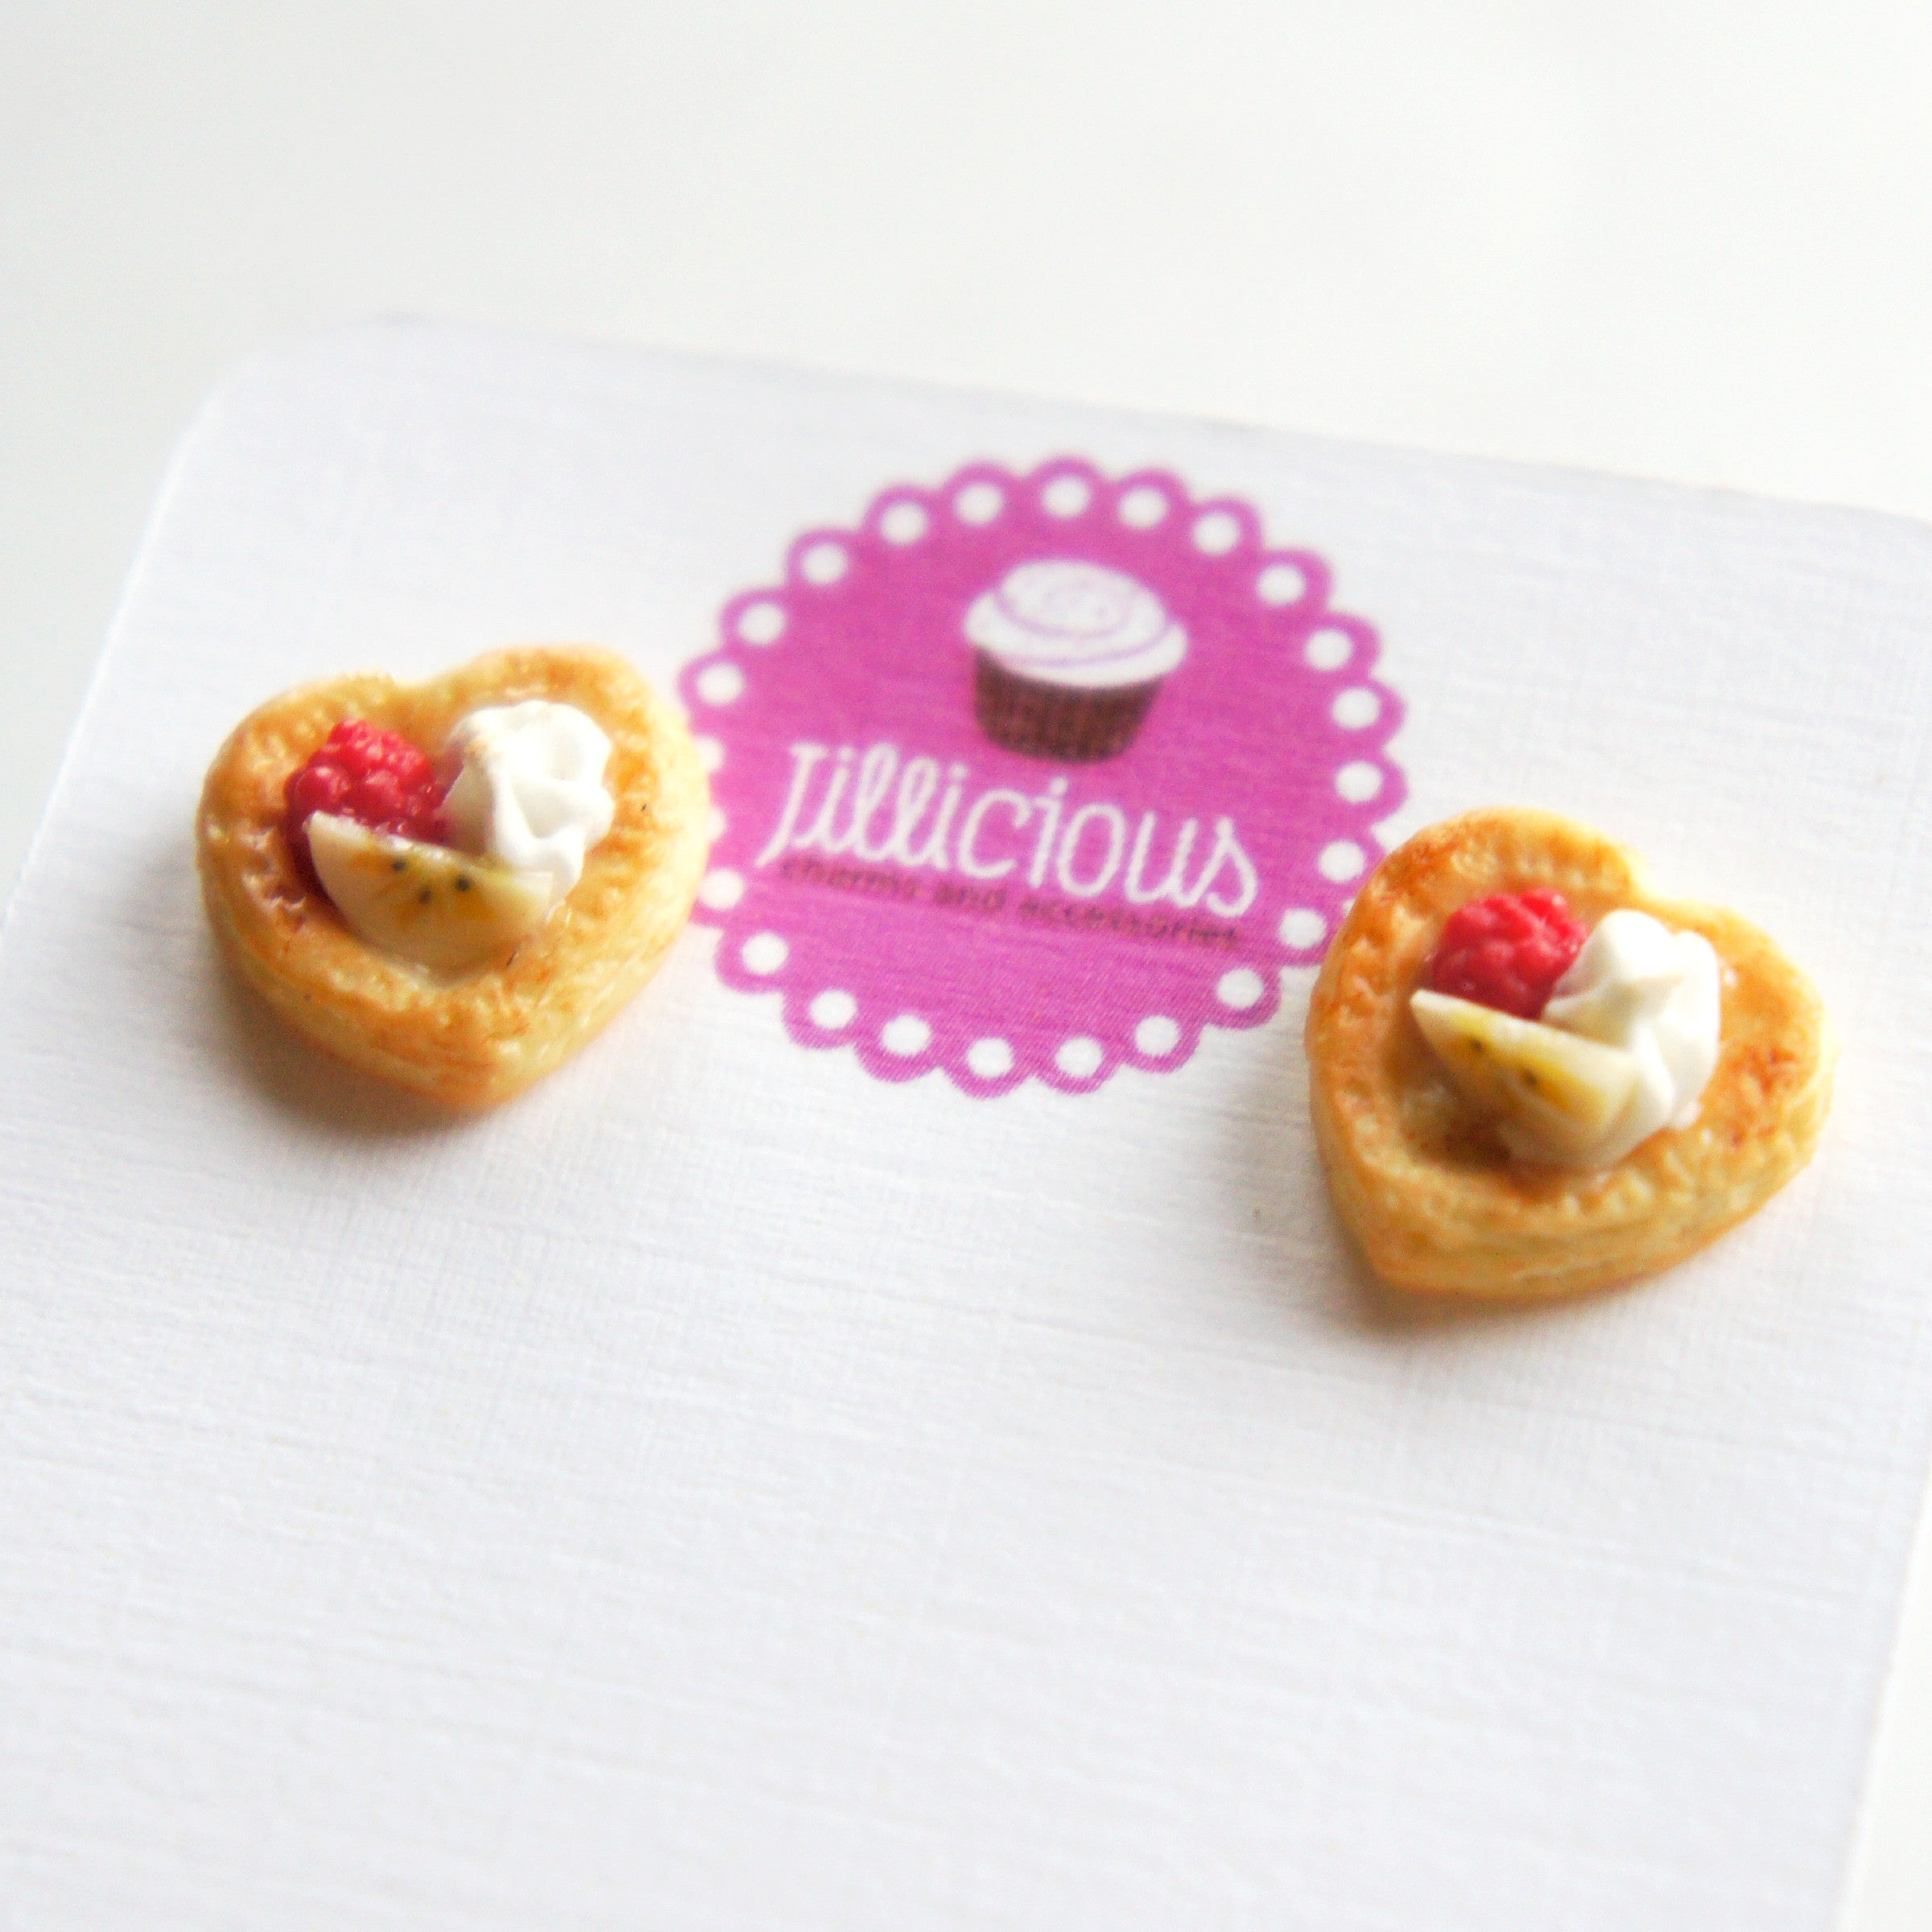 Raspberry Banana Pastry Stud Earrings - Jillicious charms and accessories